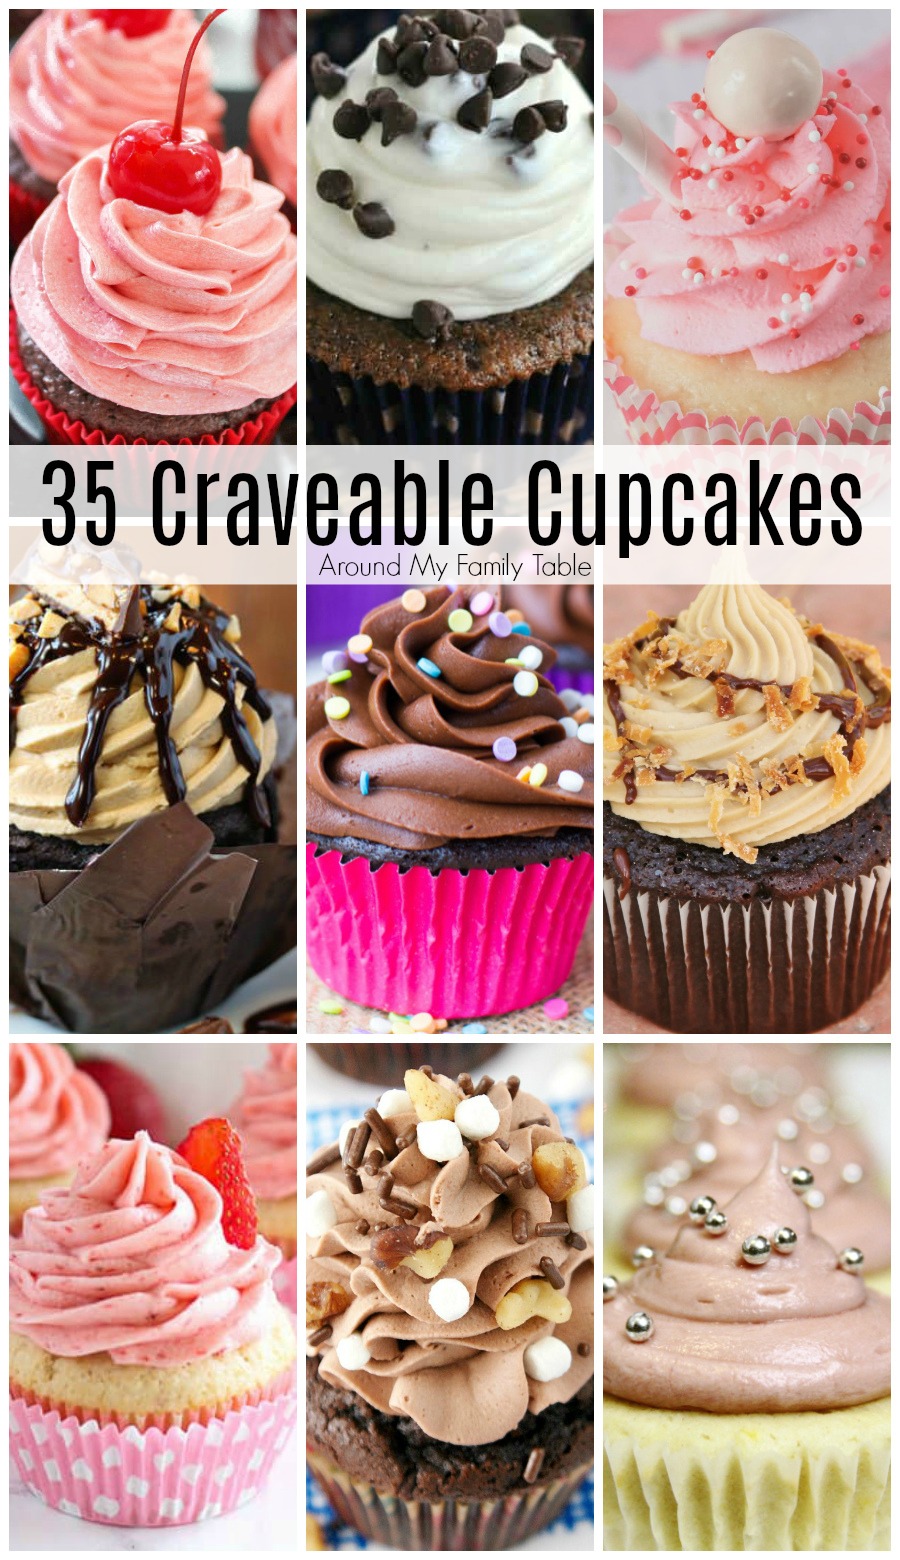 With Valentine’s Day right around the corner, these 35 Craveable Cupcakes are sure to delight your sweetie.